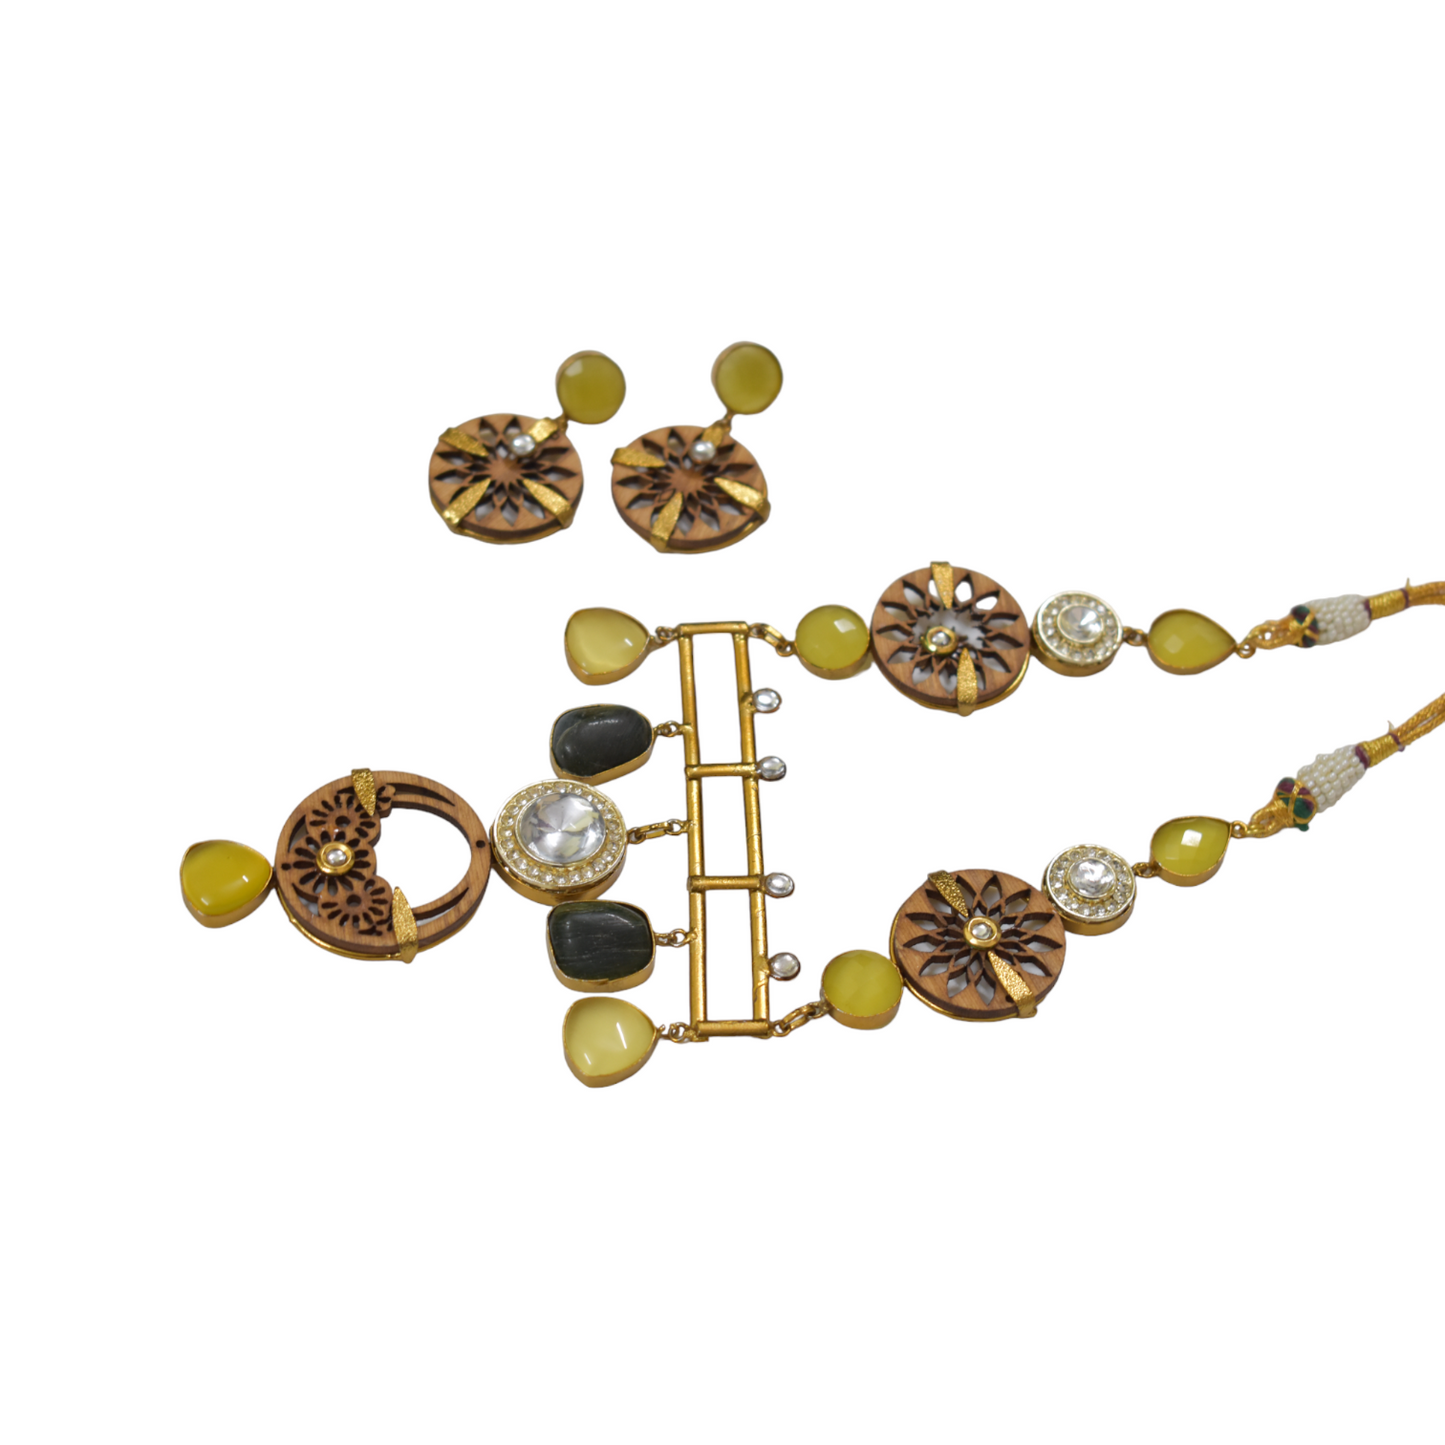 Goldplated wooden stone beads necklace